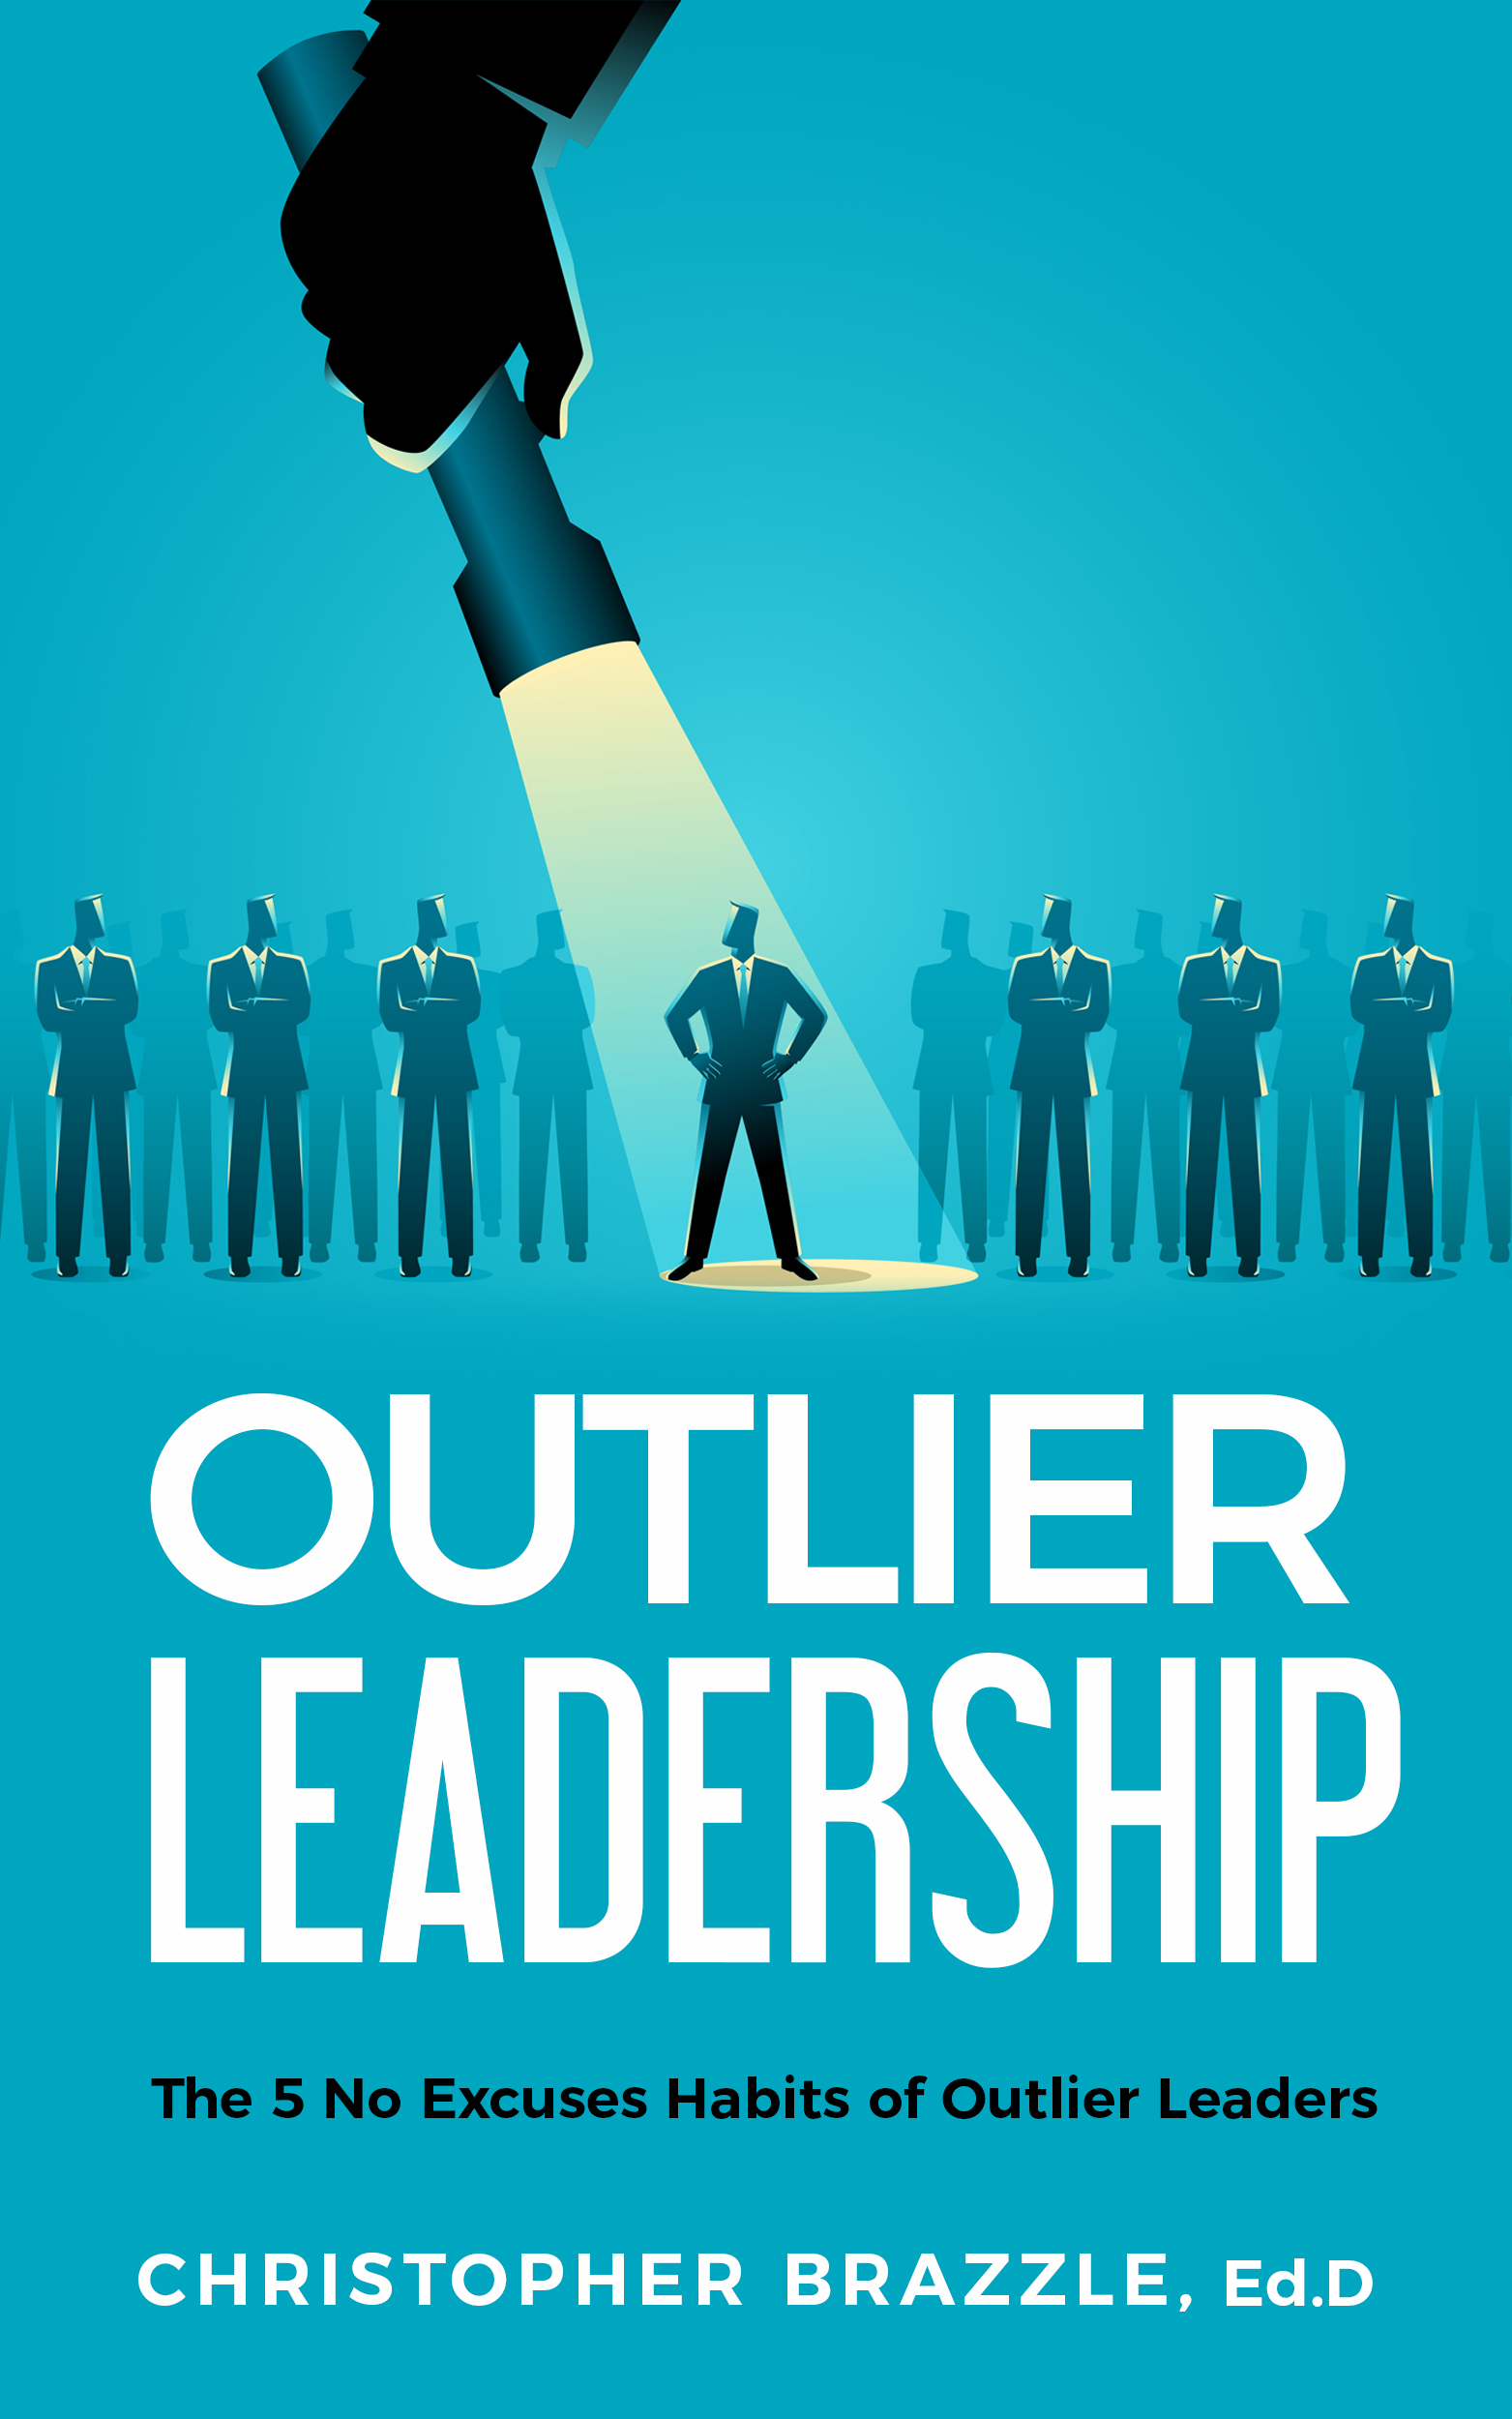 FREE: Outlier Leadership: The 5 No Excuses Habits of Outlier Leaders by Dr. Christopher Brazzle